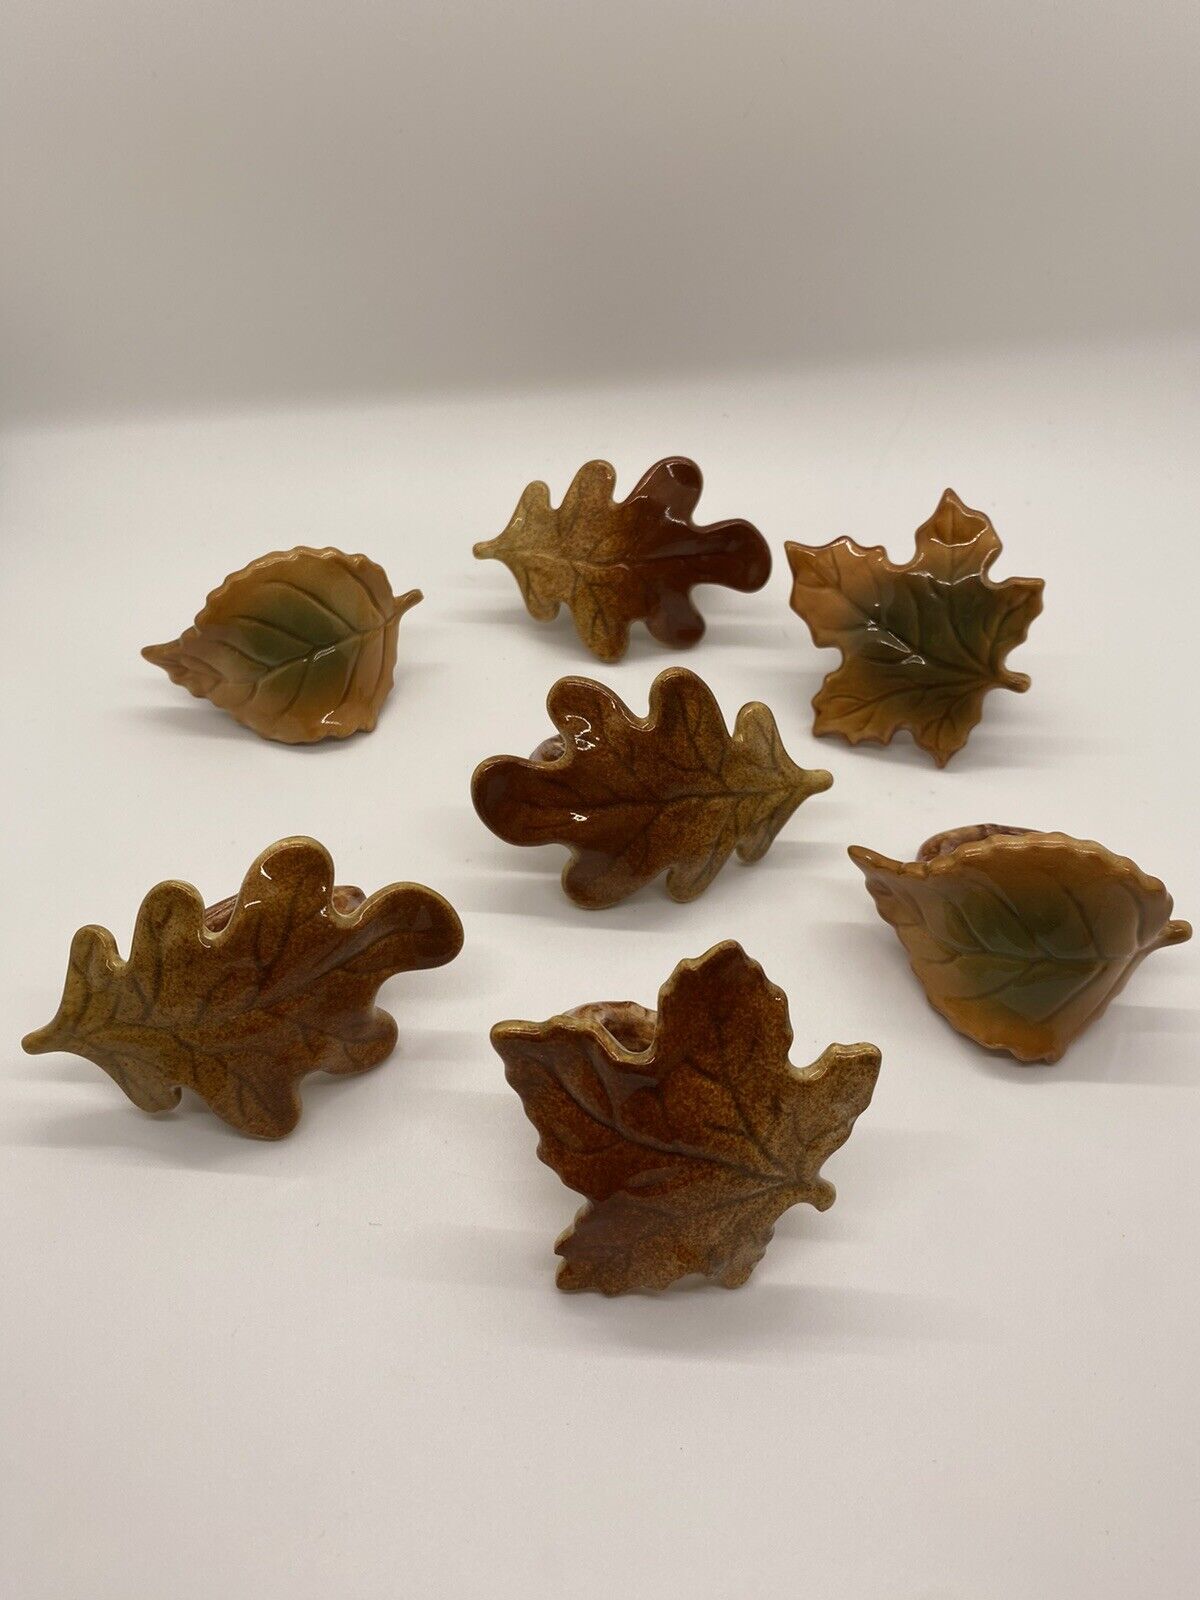 Set of 7 Russ Hand Painted Ceramic Leaf Napkin Holders 2.5 in.